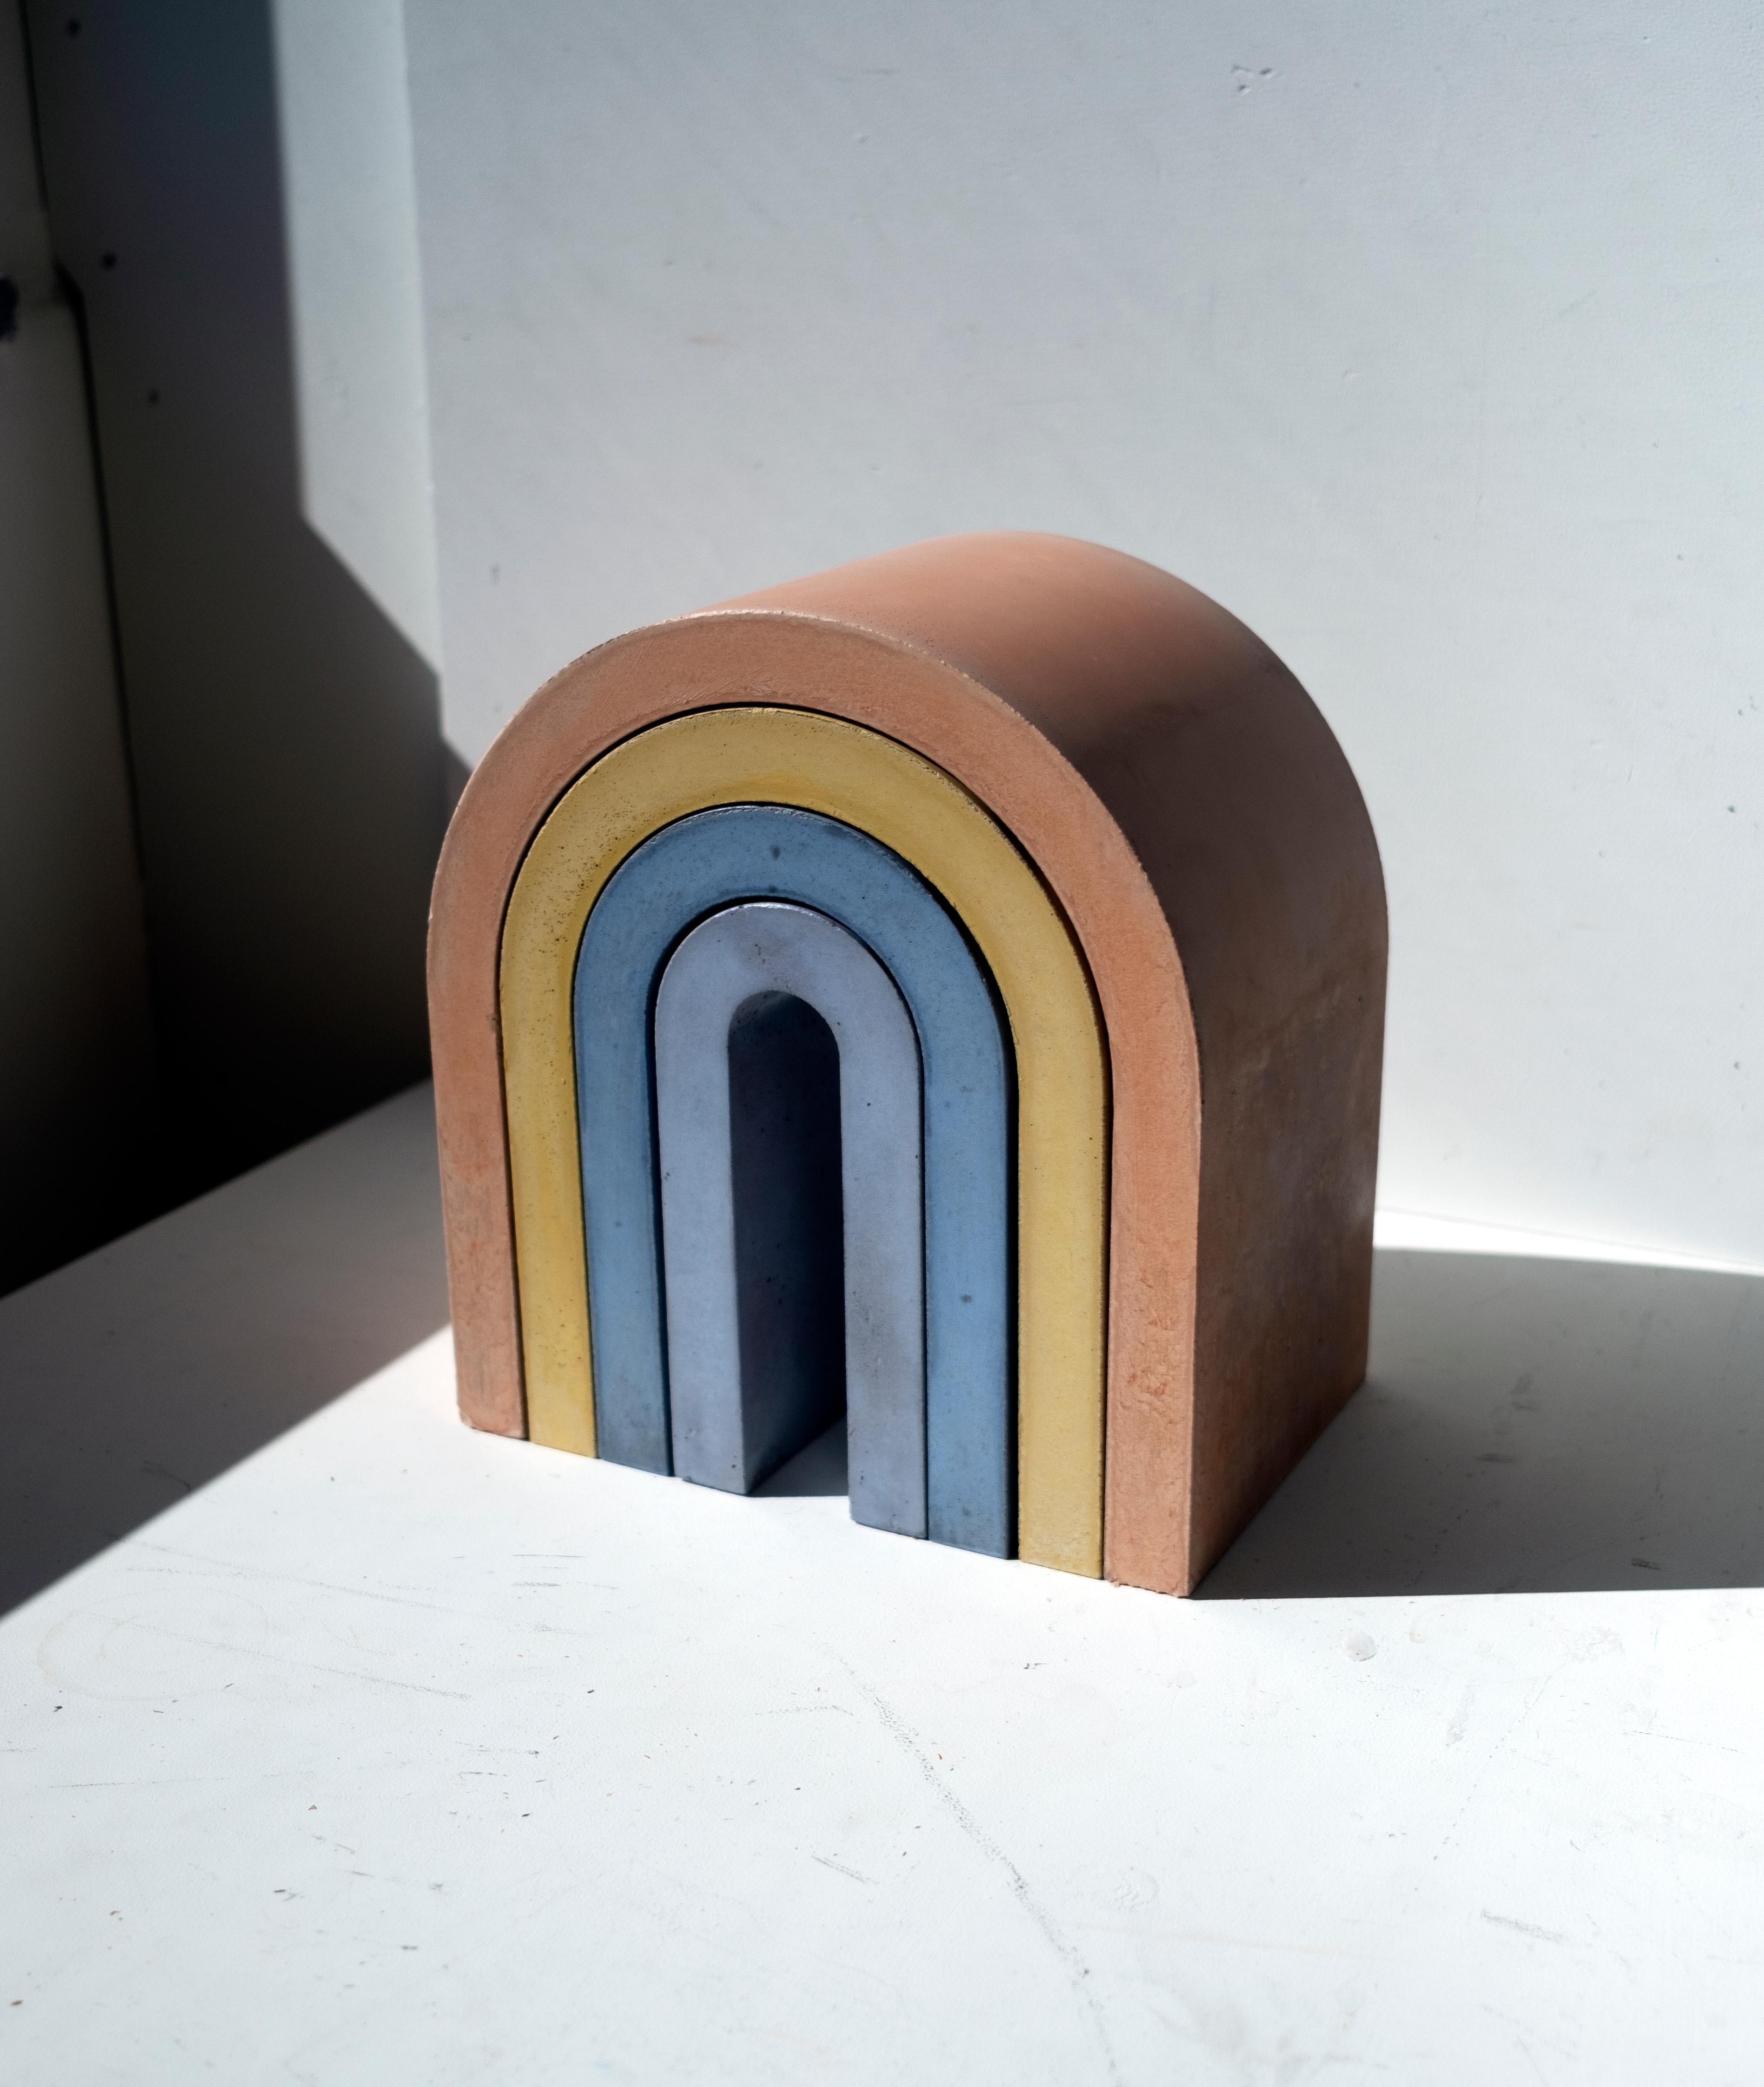 Rainbow nesting sculpture made in colored concrete in 4 separate pieces. Each piece is casted in high quality pastina cement by skilled craftsmen from Italy. The sculpture could be used both as a single rainbow or as separate pieces to highlight